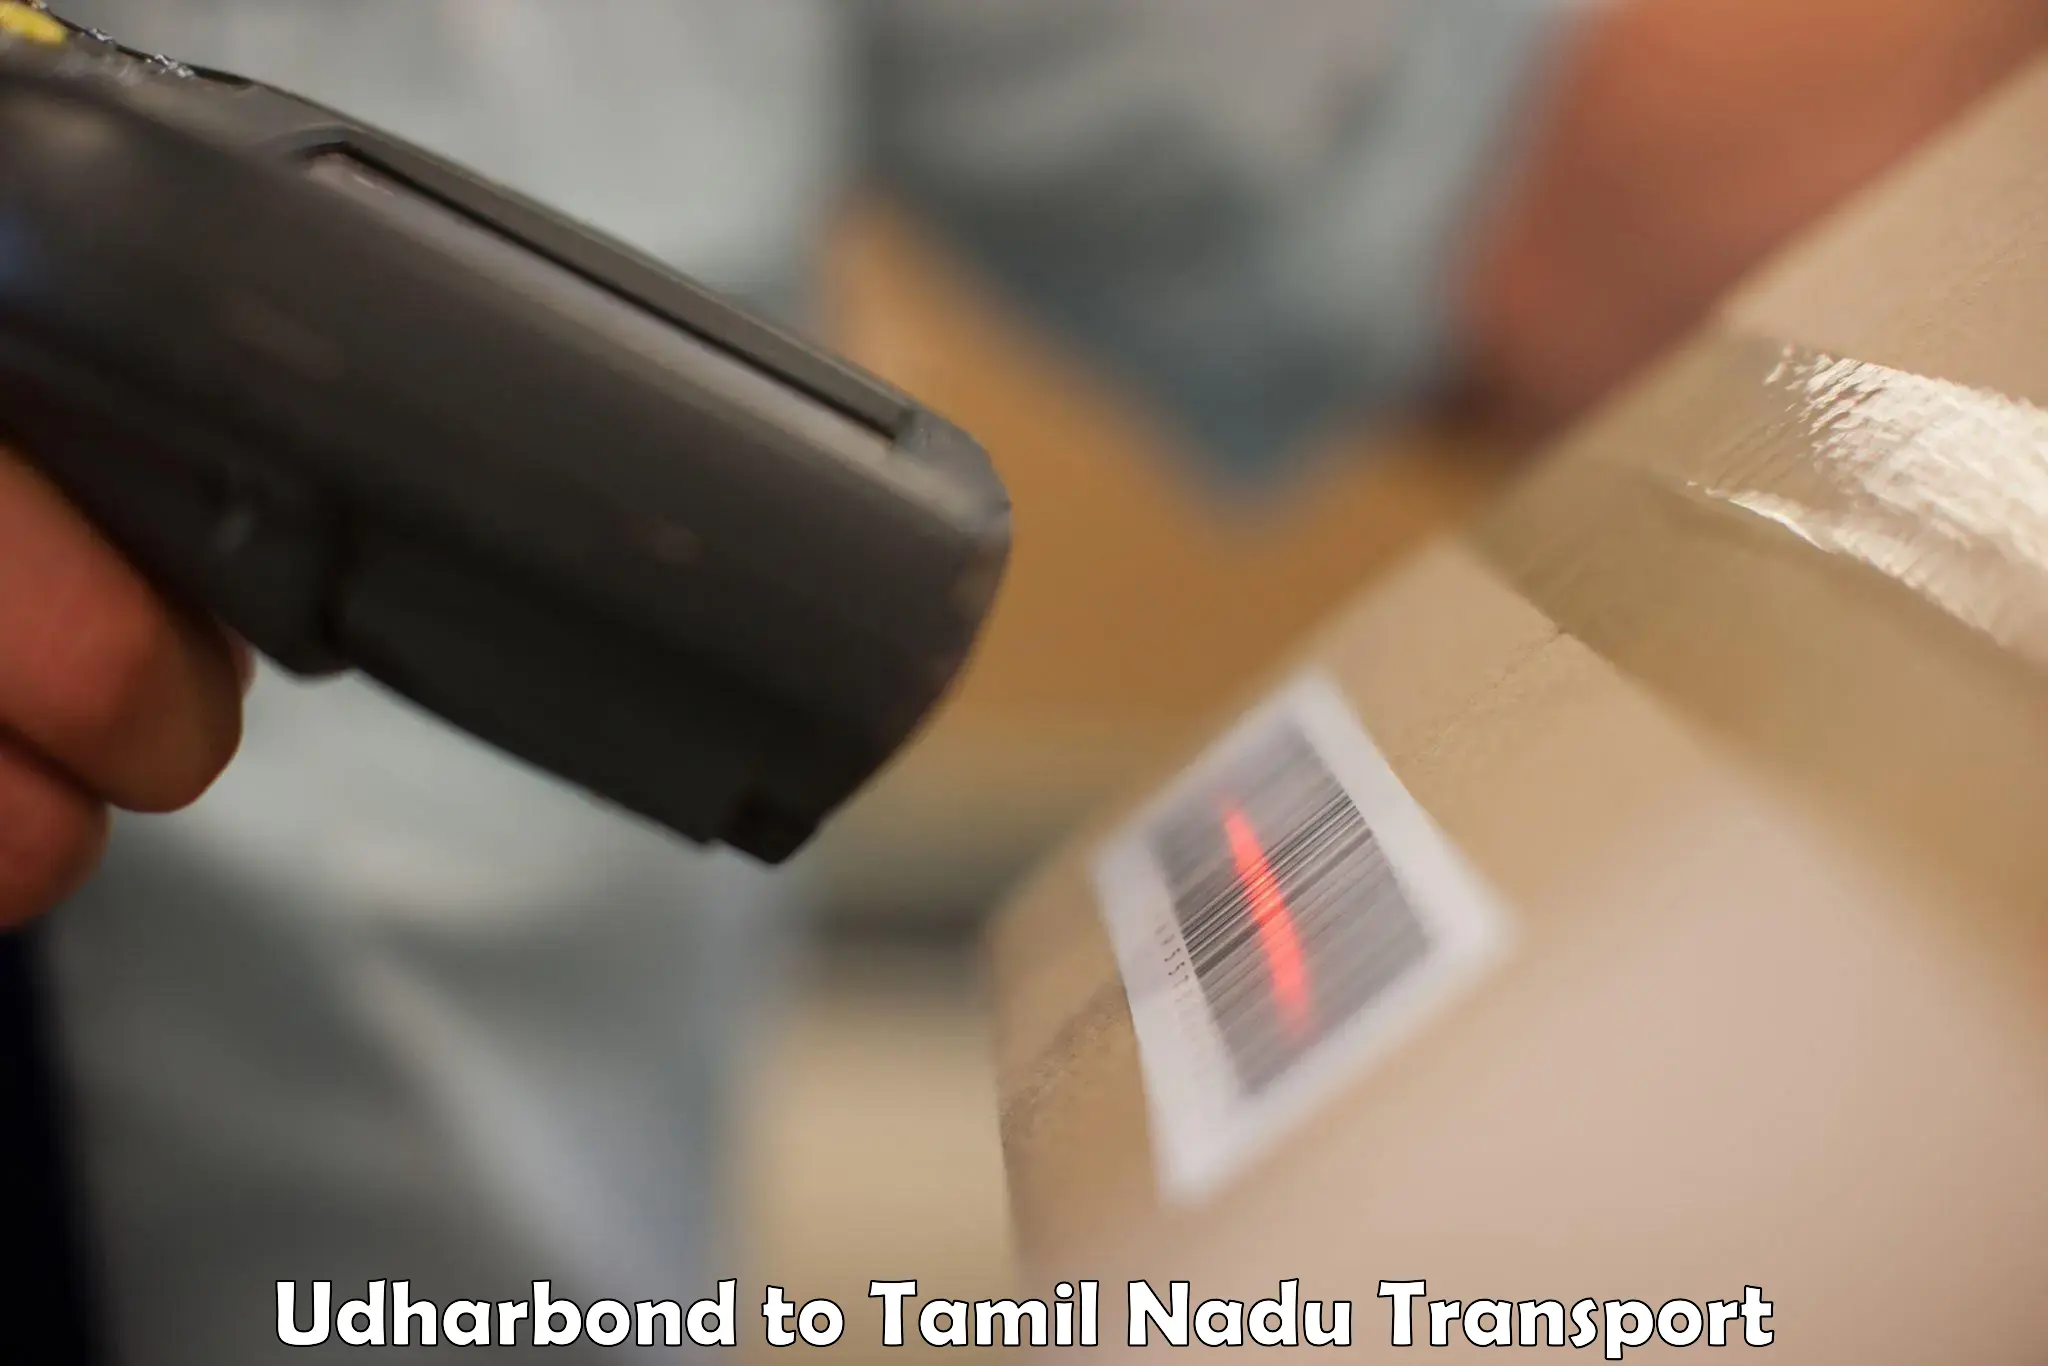 Goods delivery service in Udharbond to Chengalpattu